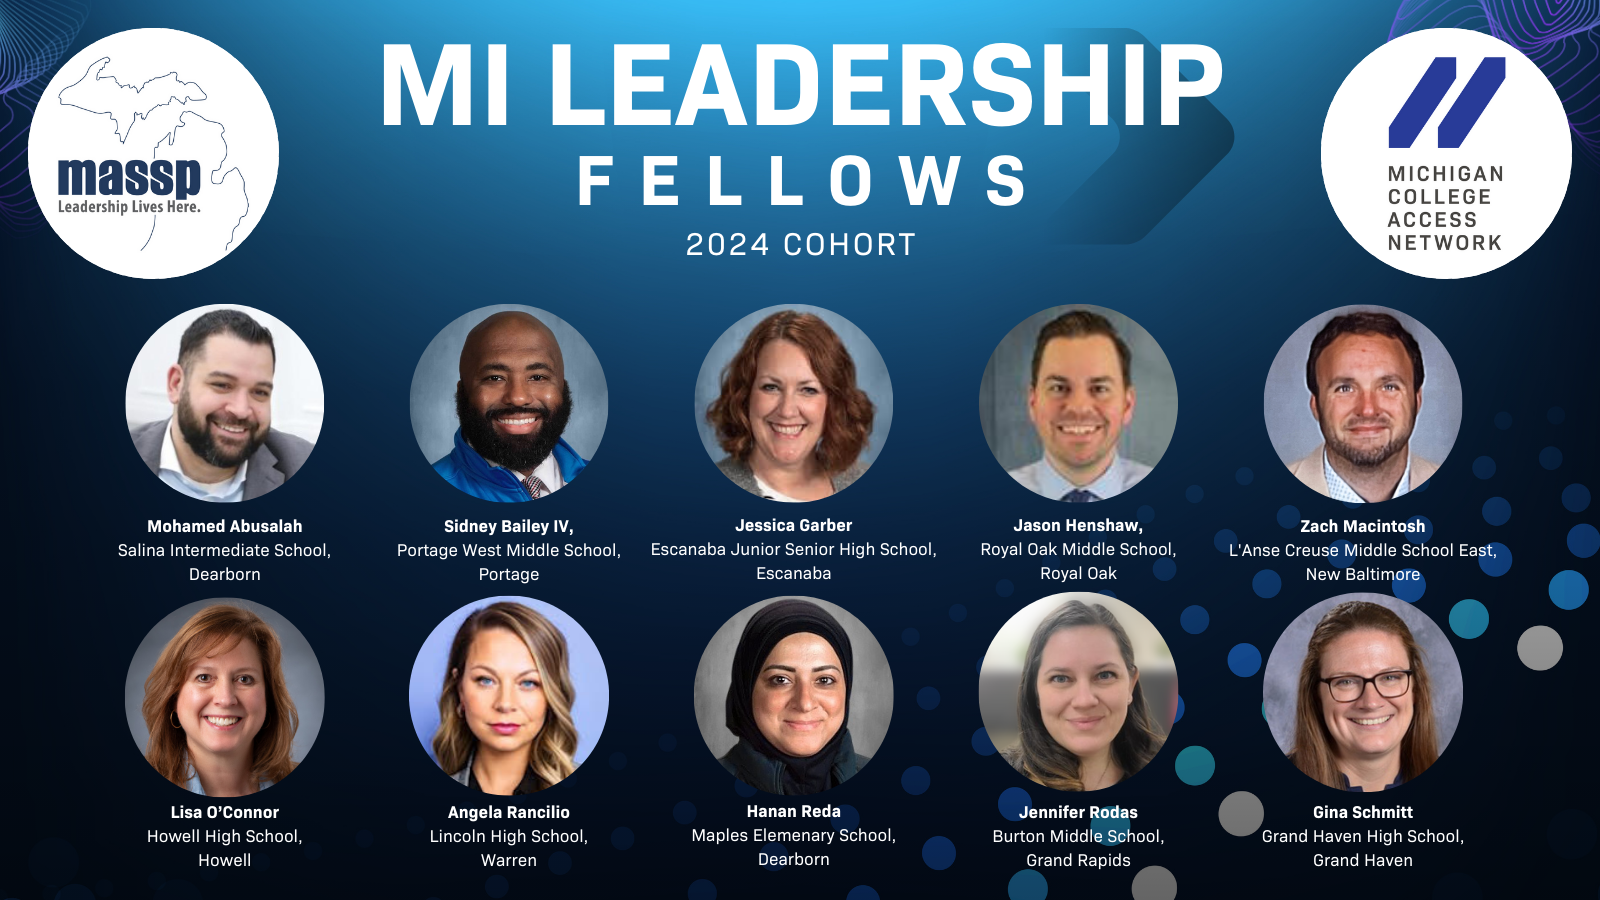 Graphic featuring all of the MI Leadership Fellows listed above.